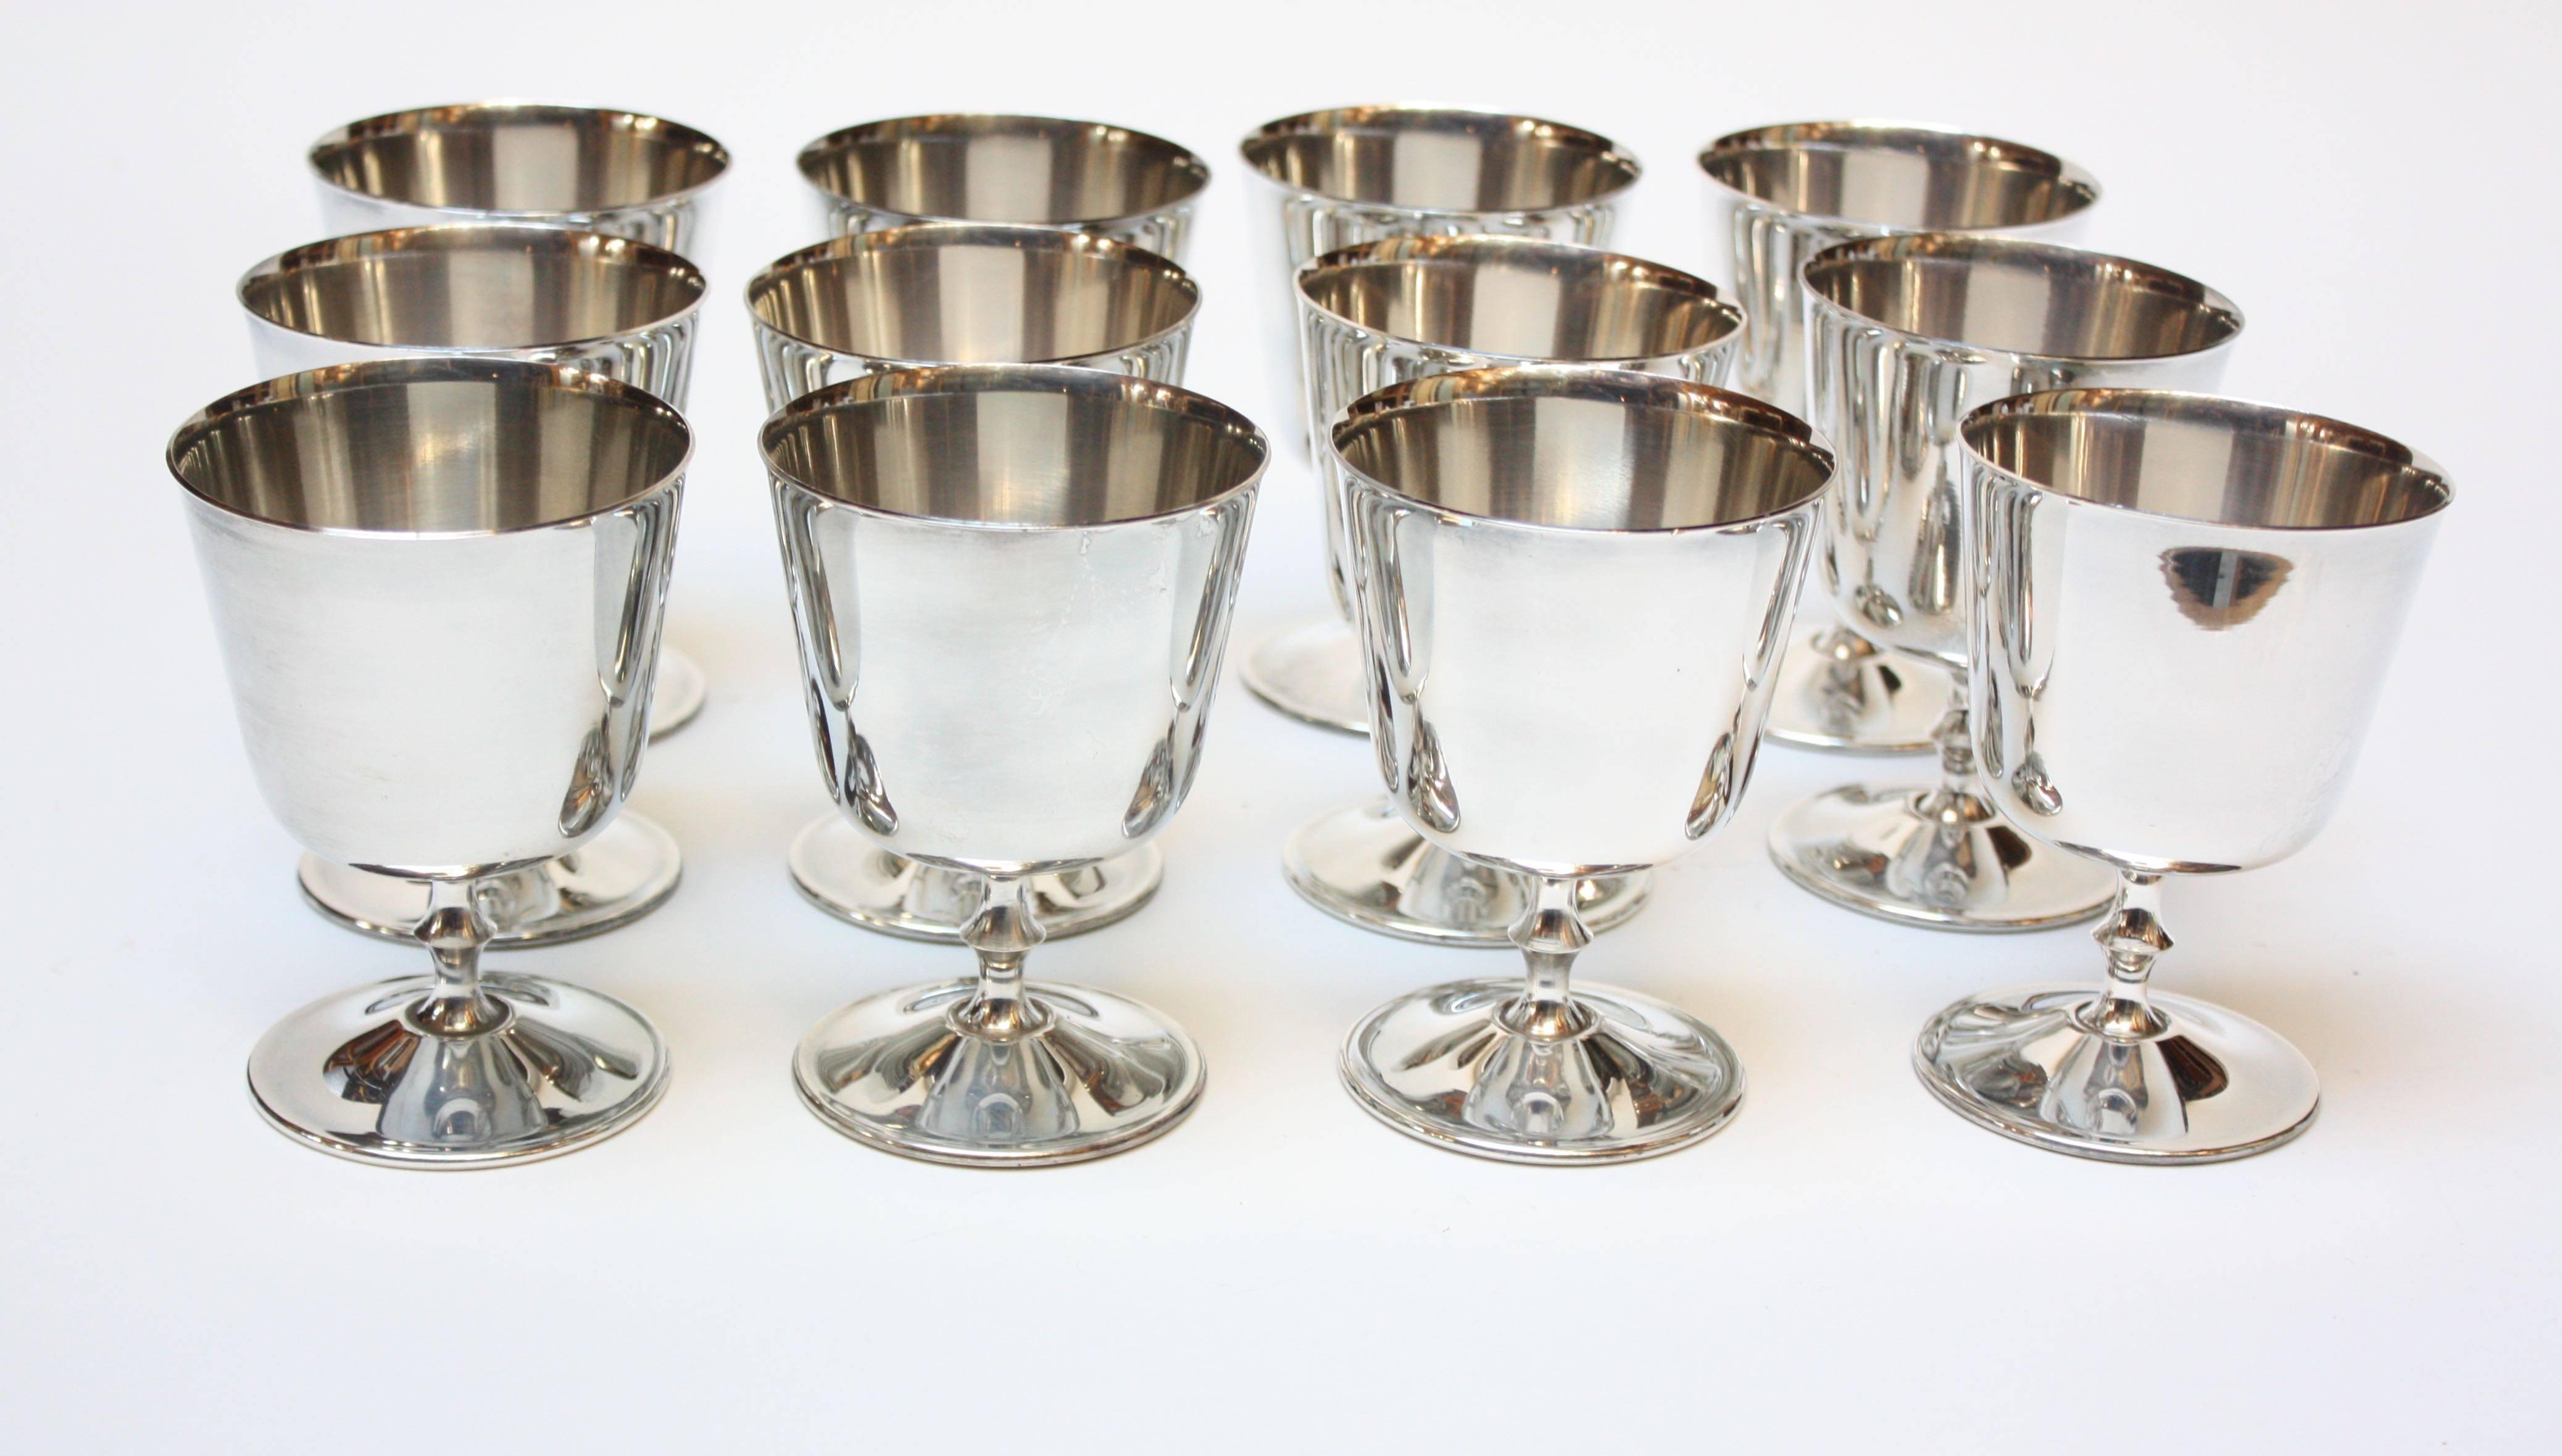 Set of 12 silver plated goblets with decorative stems by De Uberti of Italy (early 1970s). Excellent, vintage condition and polished to bring out the original luster. 
Branded on underside De Uberti / EL (their US Partner, Eisenberg-Lozano).